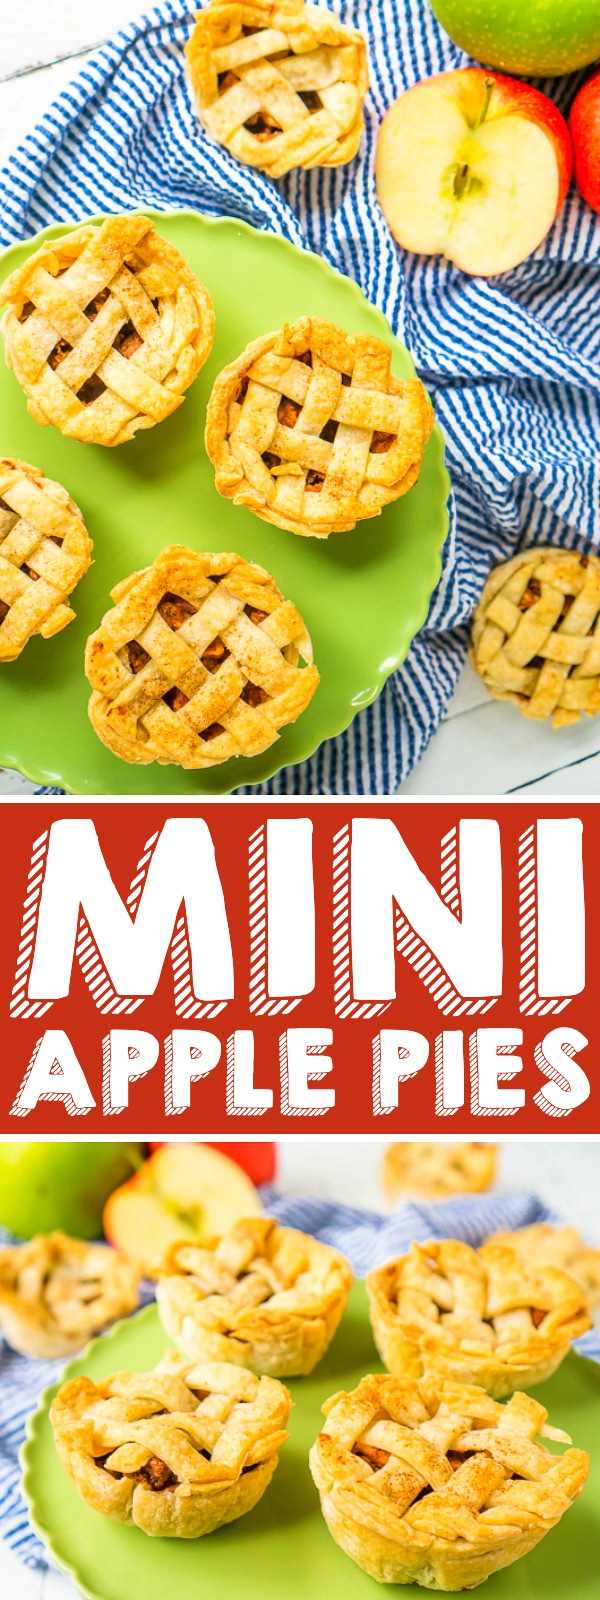 Mini Apple Pies are the perfect holiday dessert! Bake these individual apples pies in a muffin tin ahead of time for a cute dessert your guests can easily serve themselves. Plus, they travel well for wherever you might be celebrating Thanksgiving or Christmas! | THE LOVE NERDS #thanksgivingdessert #christmasdessert #thanksgivingpie #christmaspie